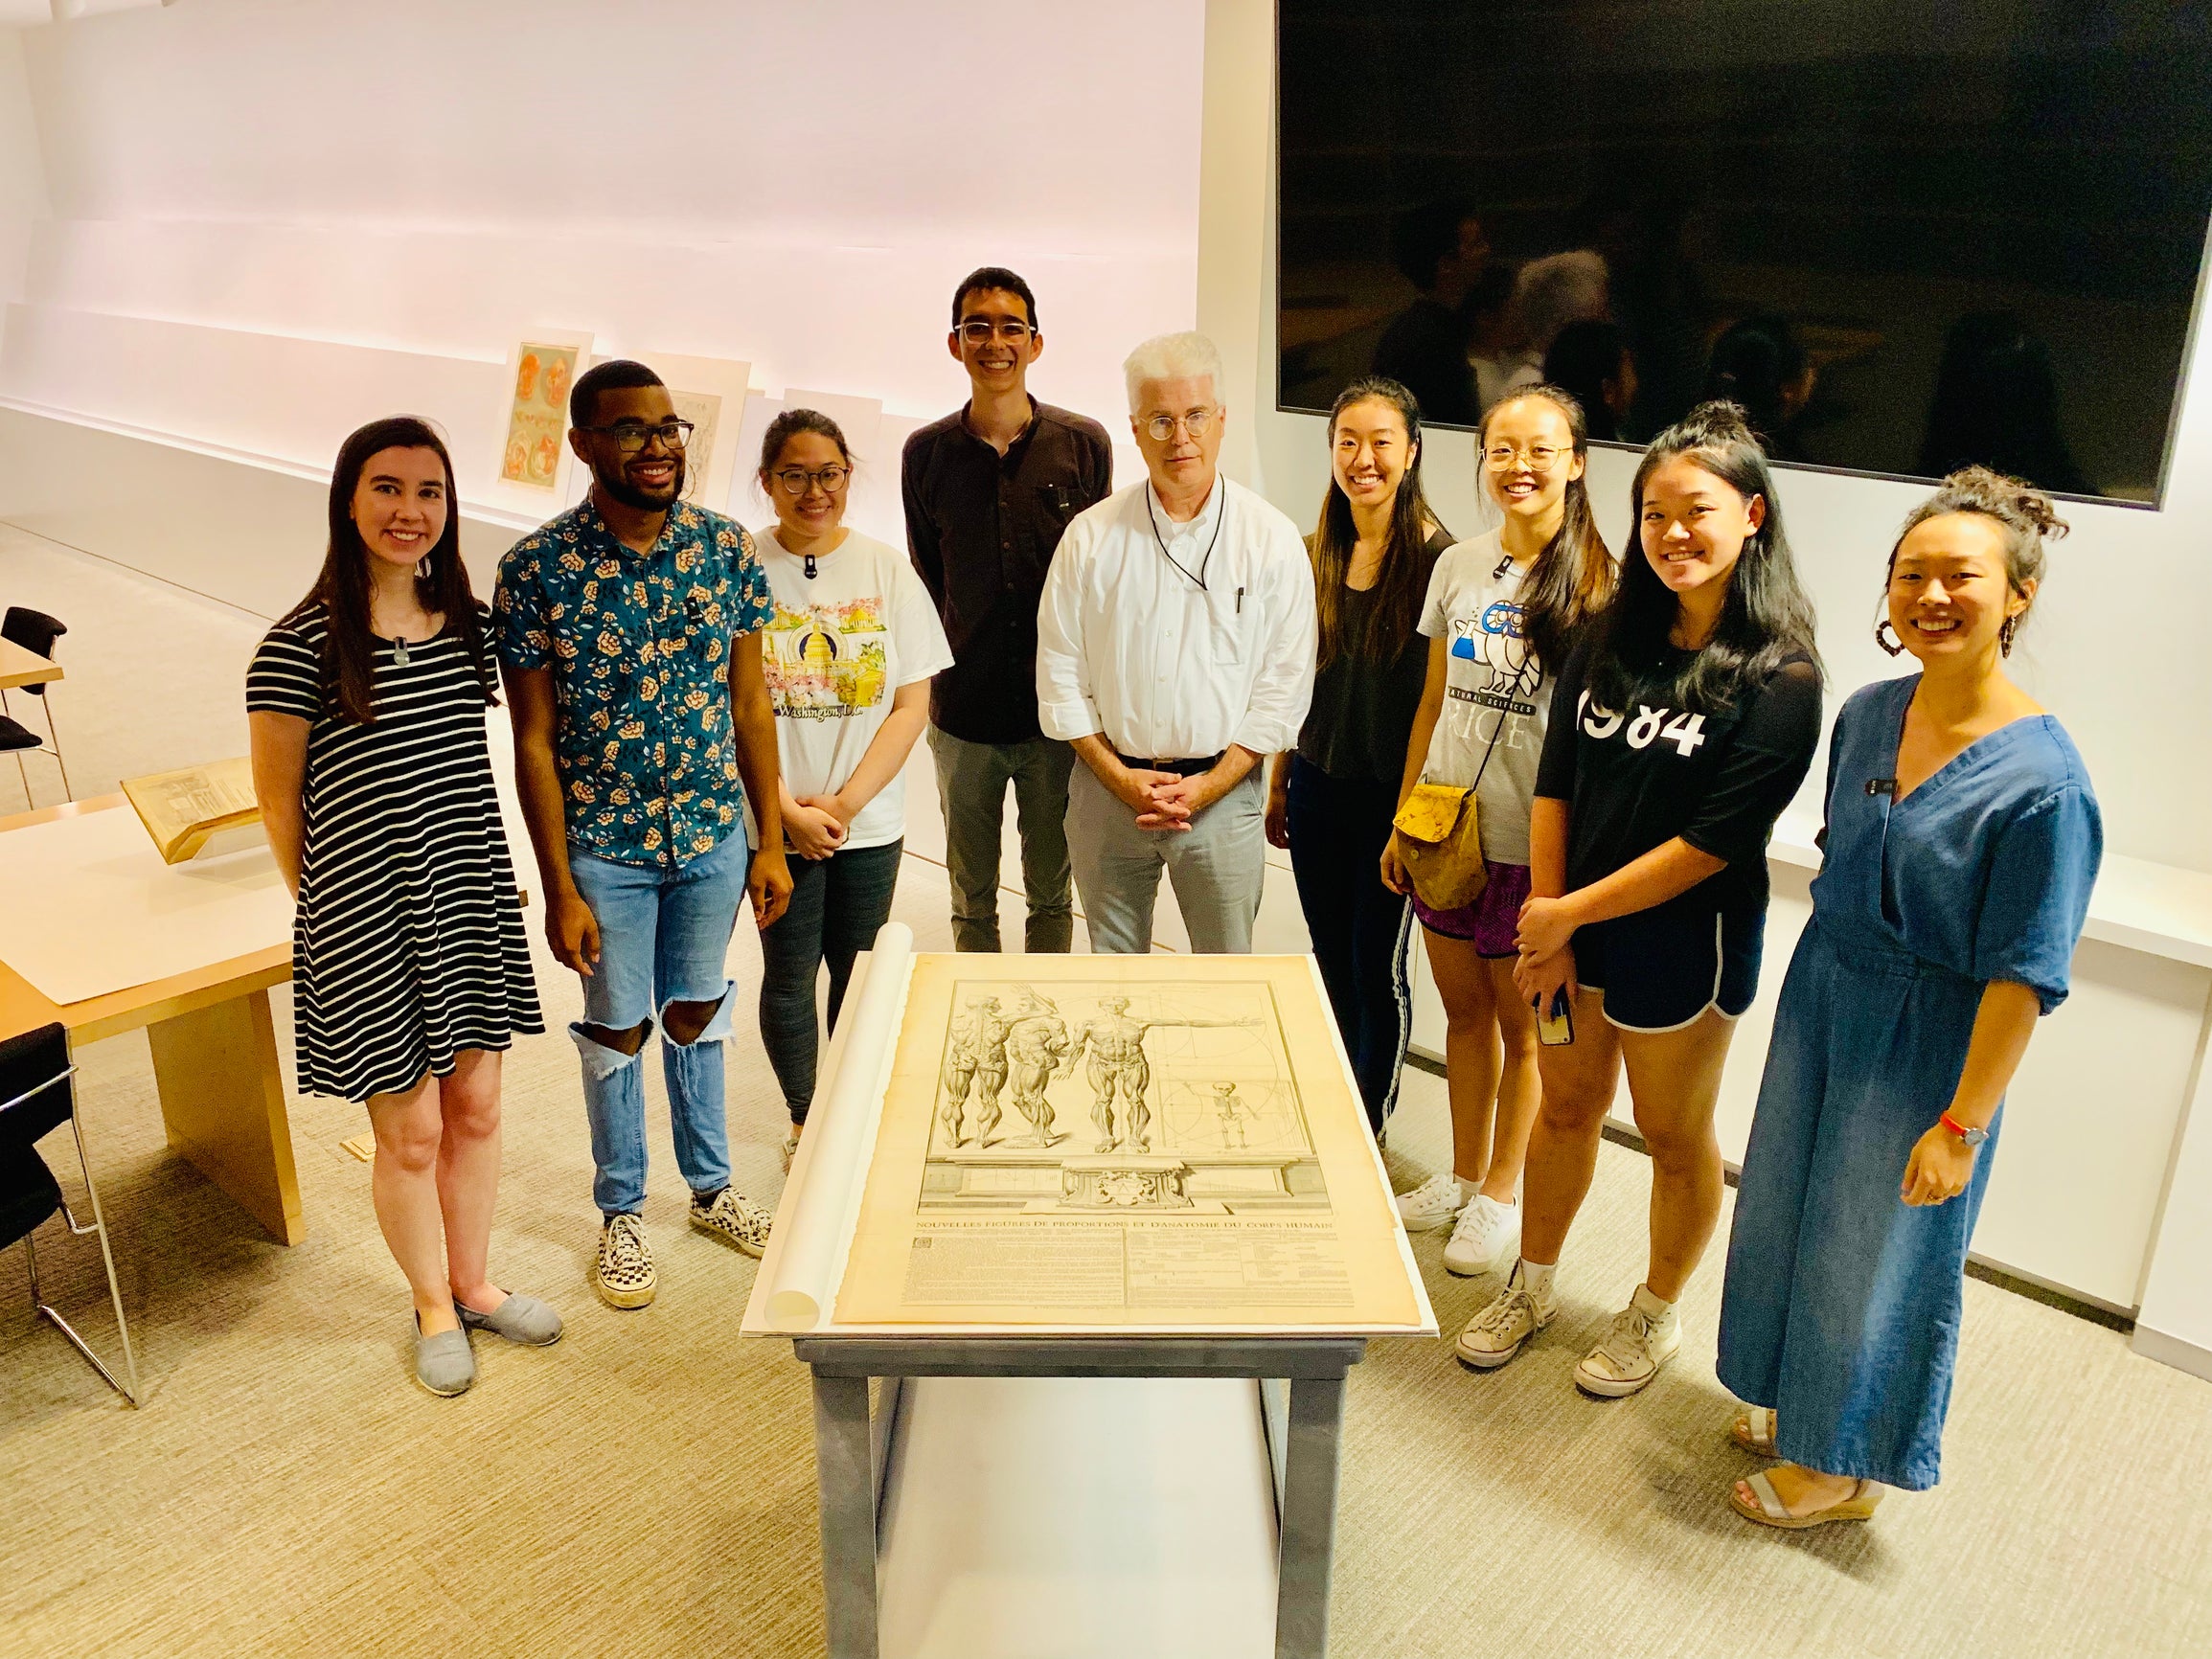 Image of Lan Li, an assistant professor of history and faculty member in the interdisciplinary Medical Humanities program at Rice, with her students and a curator at the Museum of Fine Arts, Houston